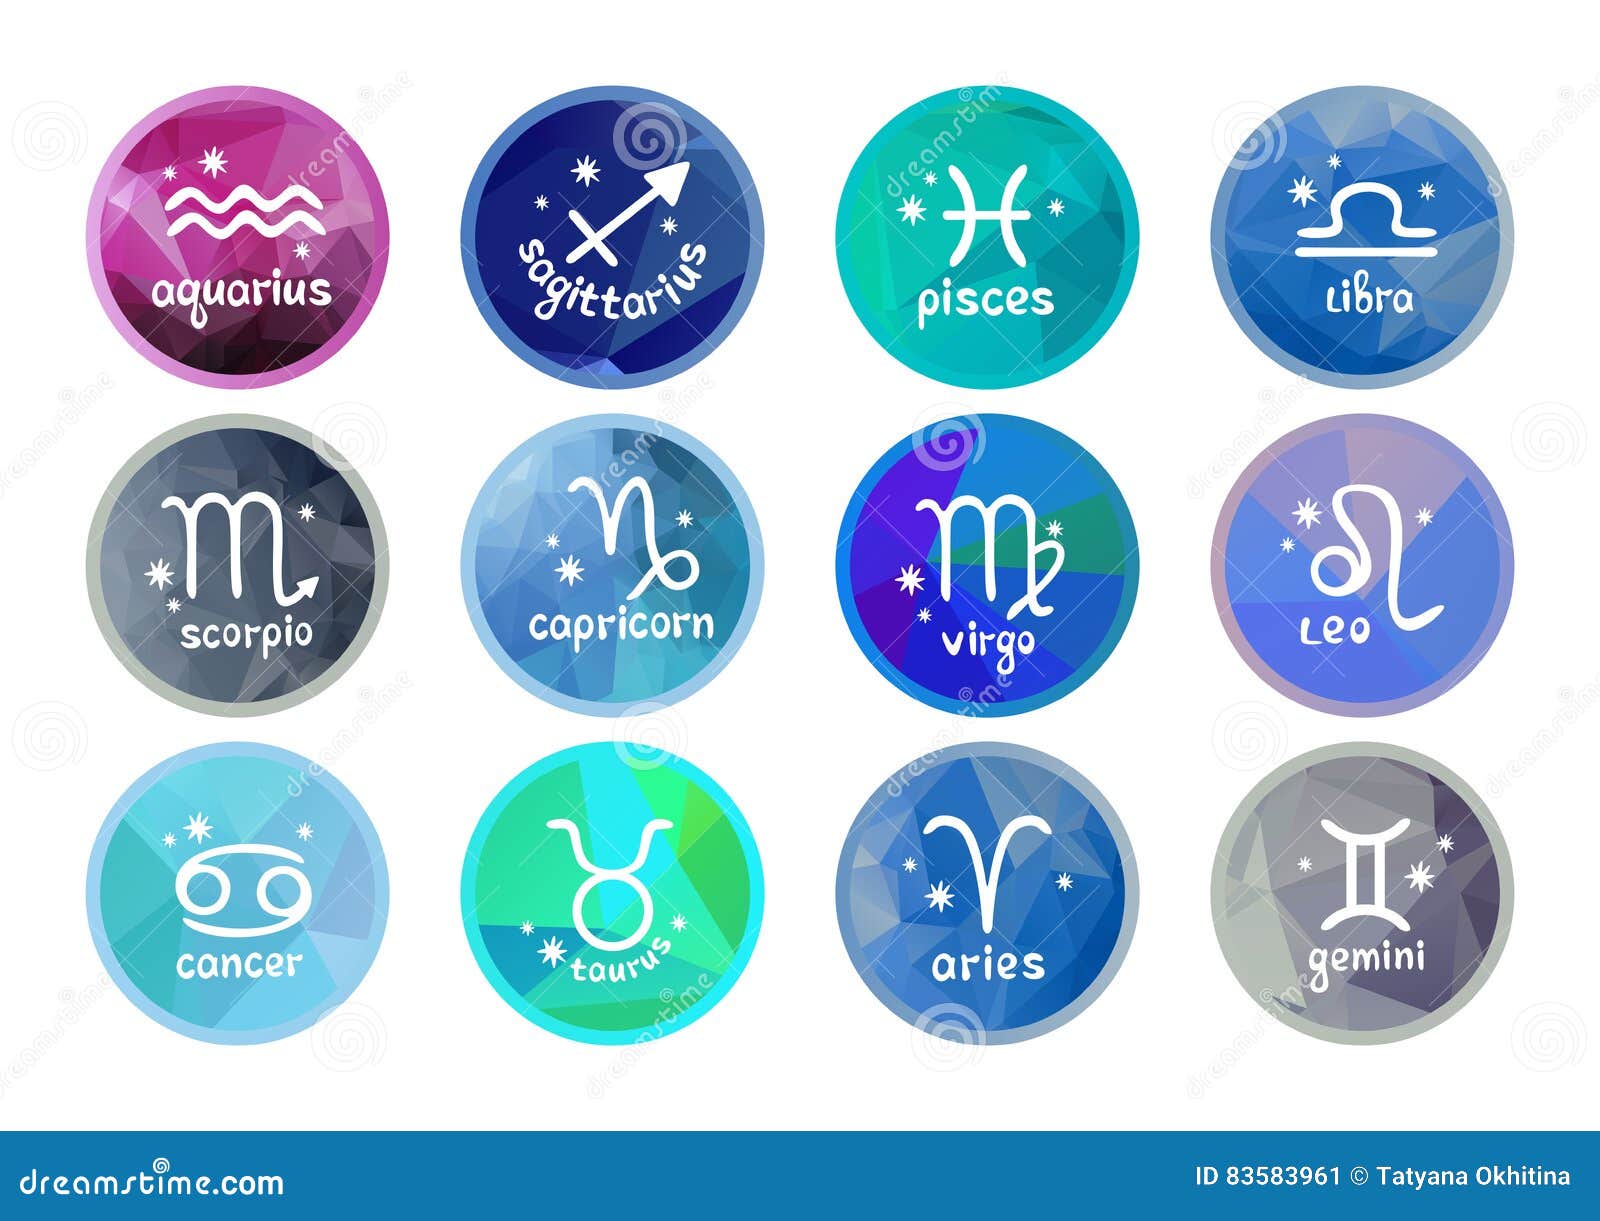 Zodiac signs collection stock vector. Illustration of violet - 83583961